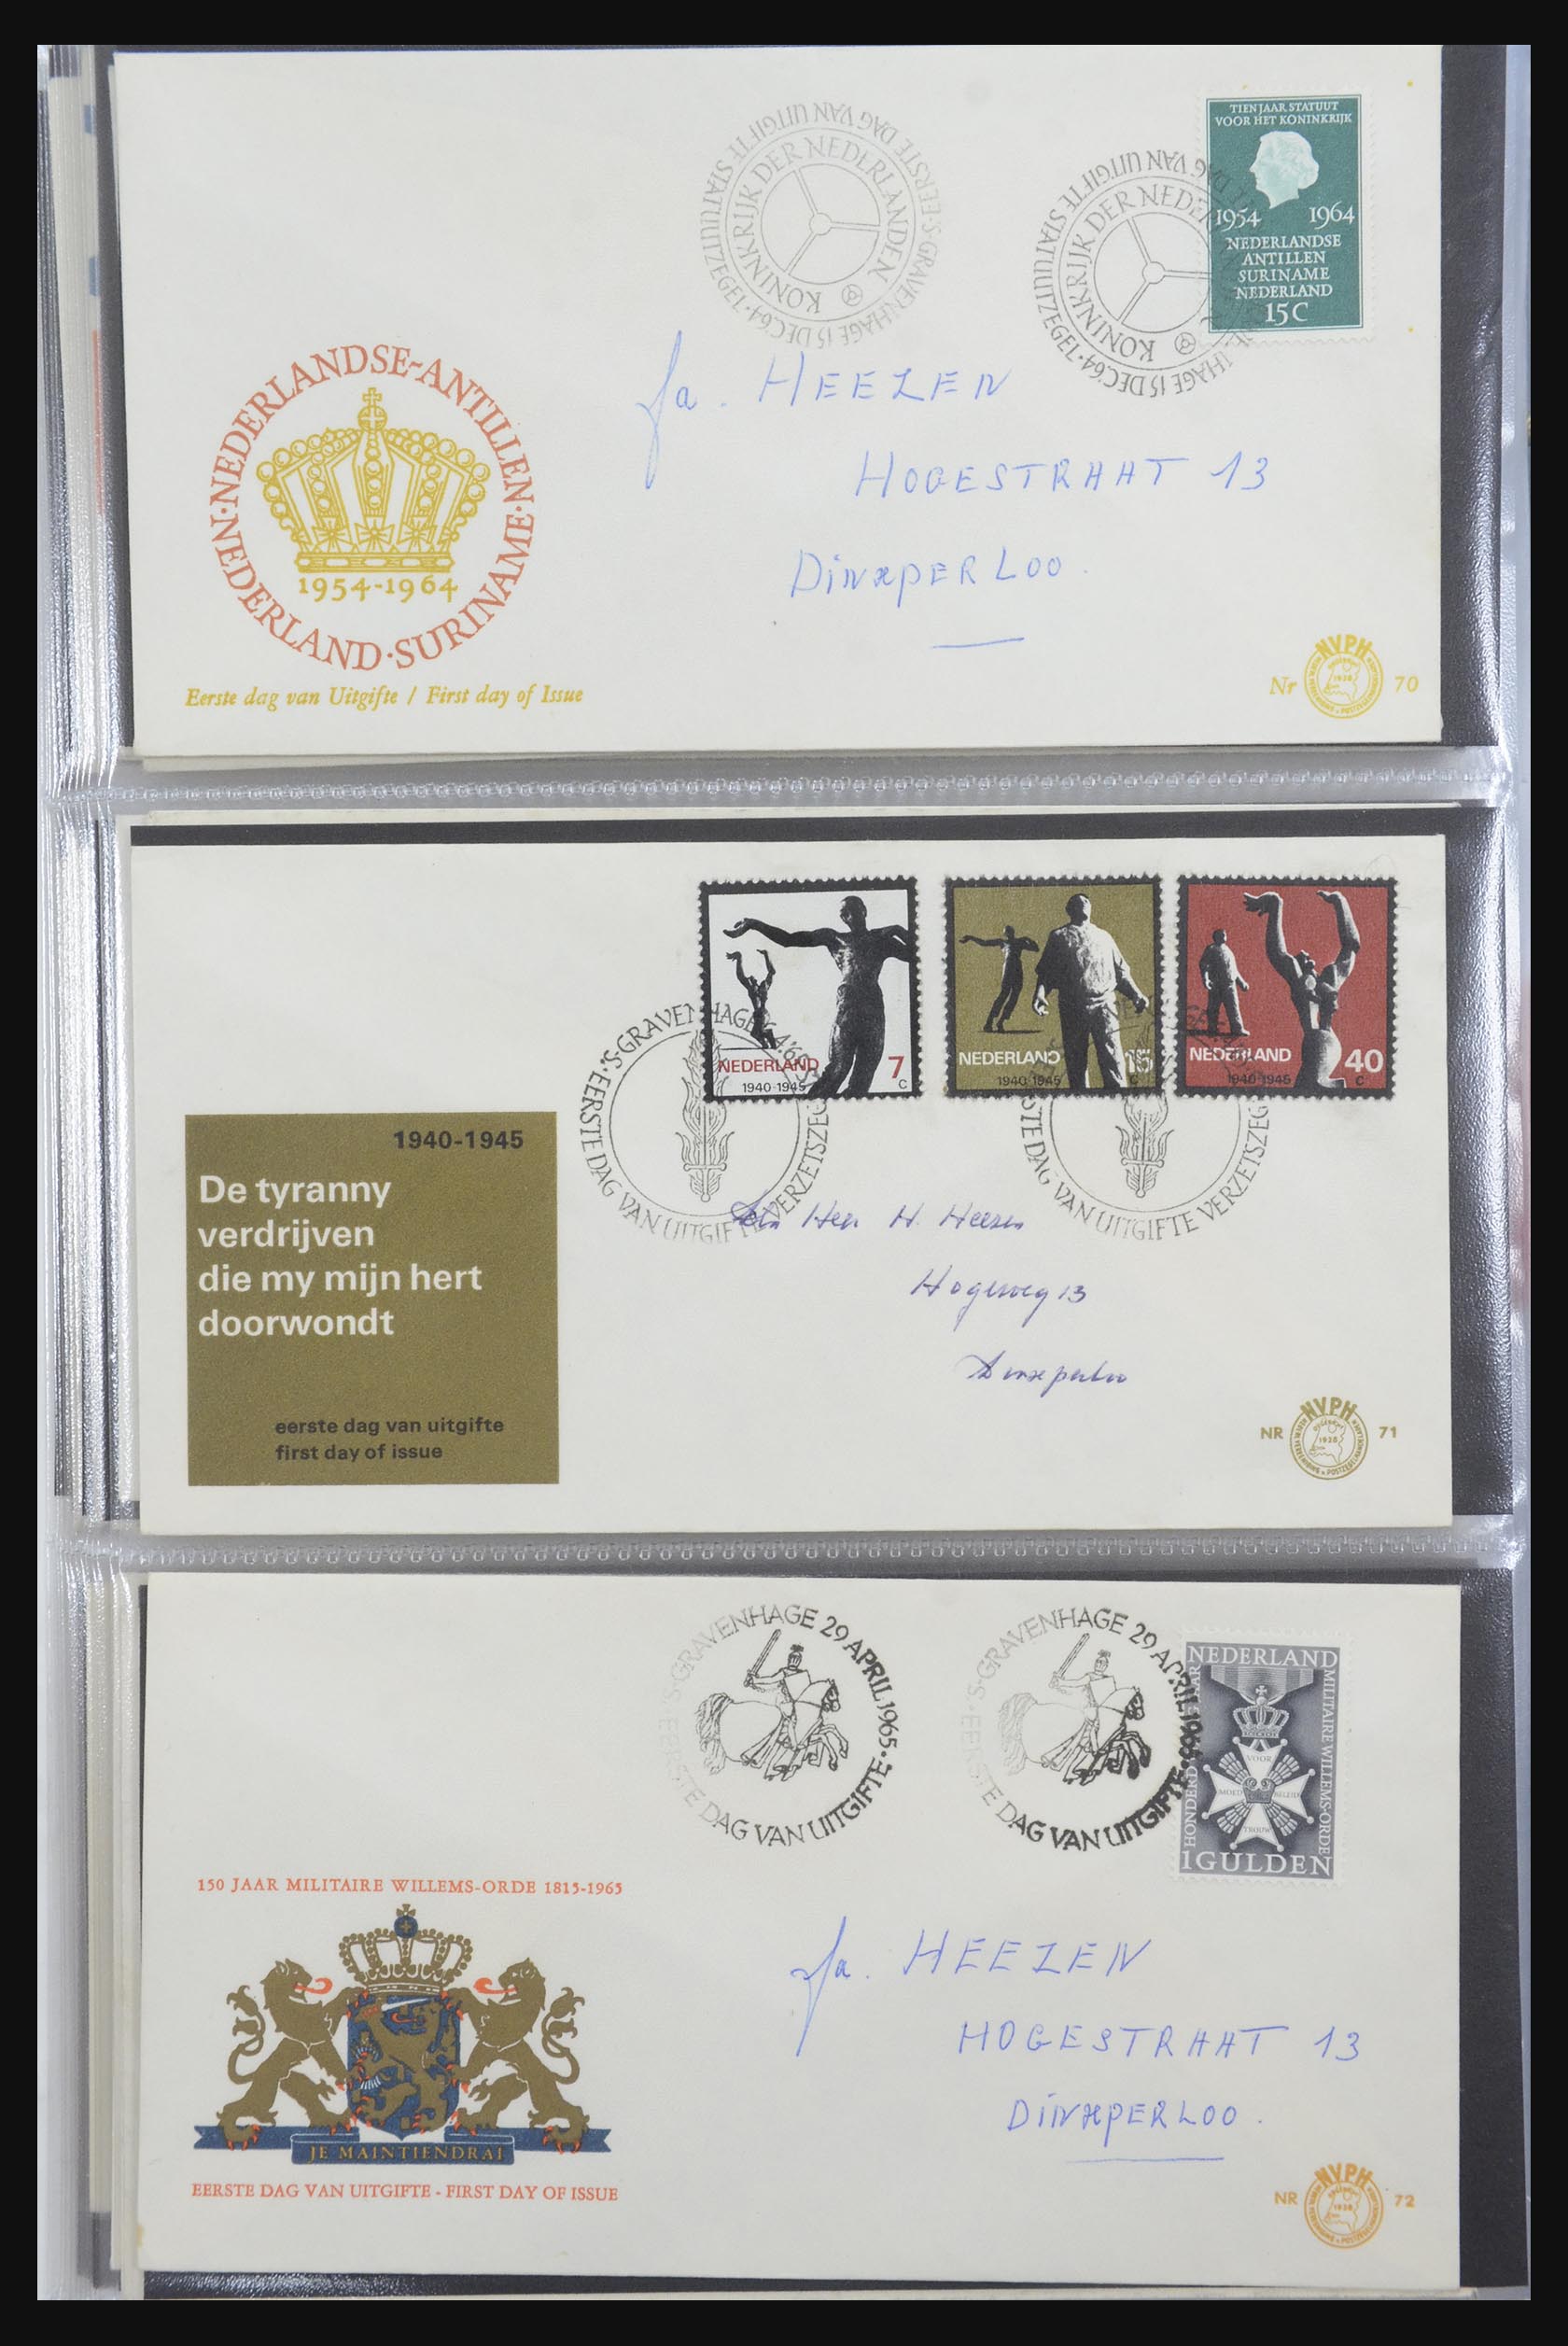 32170 021 - 32170 Netherlands FDC's 1953-2004.